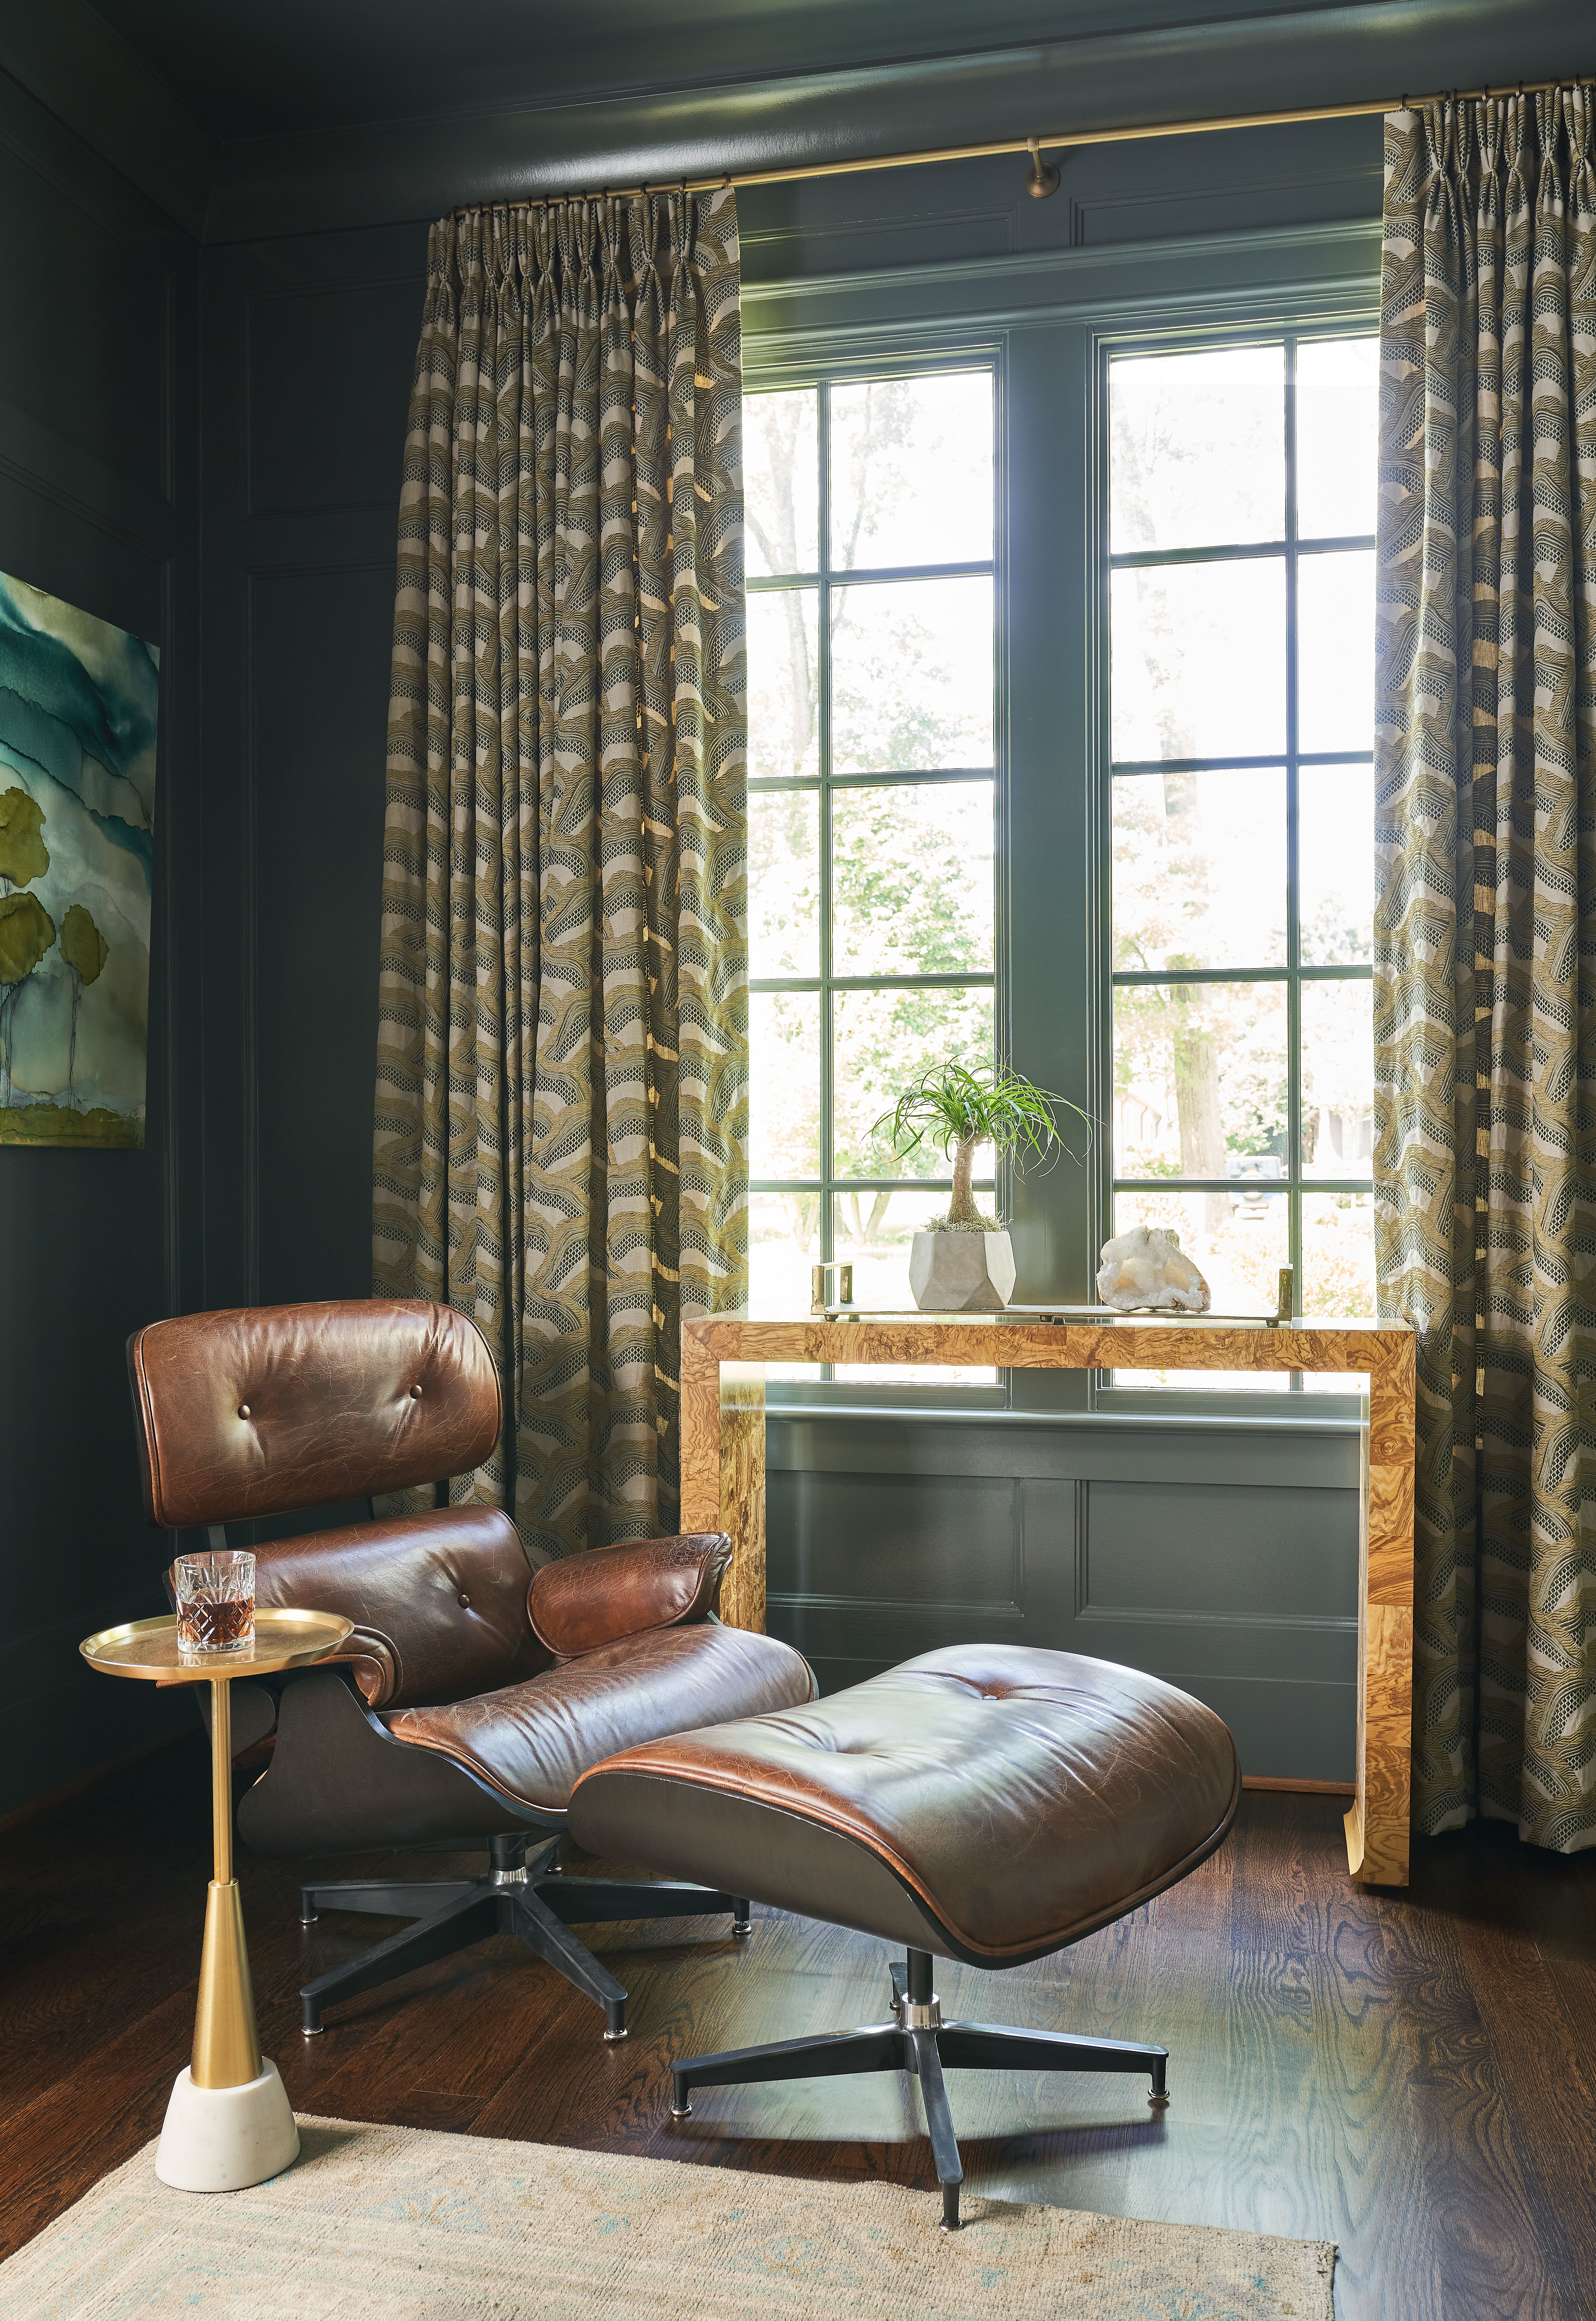 A leather armchair with a footstool to match close by a window with patterned curtains